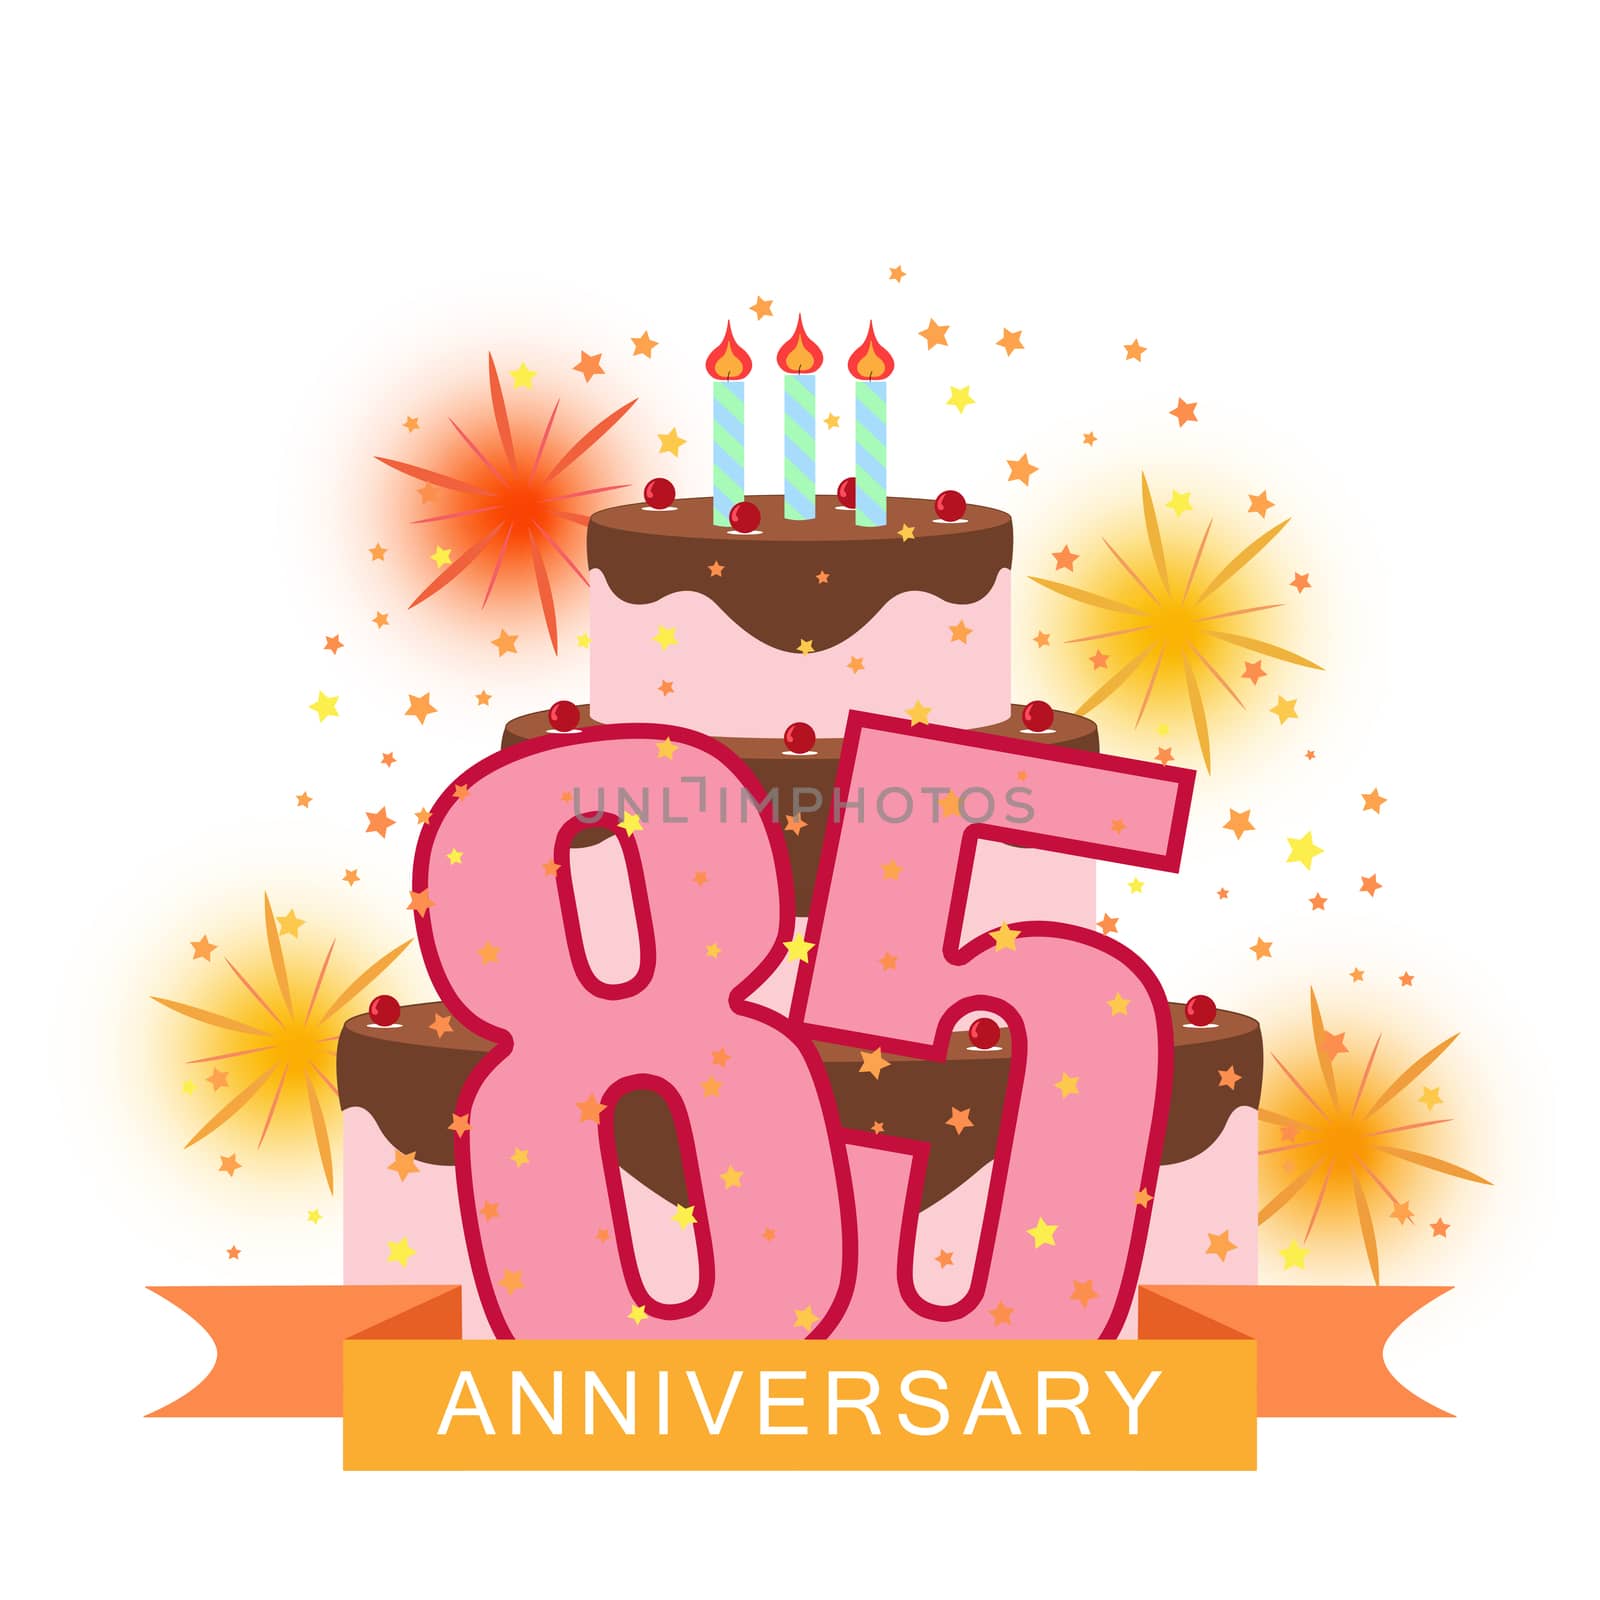 Illustrated image with the number eighty-five, cake, fireworks and a starry rain